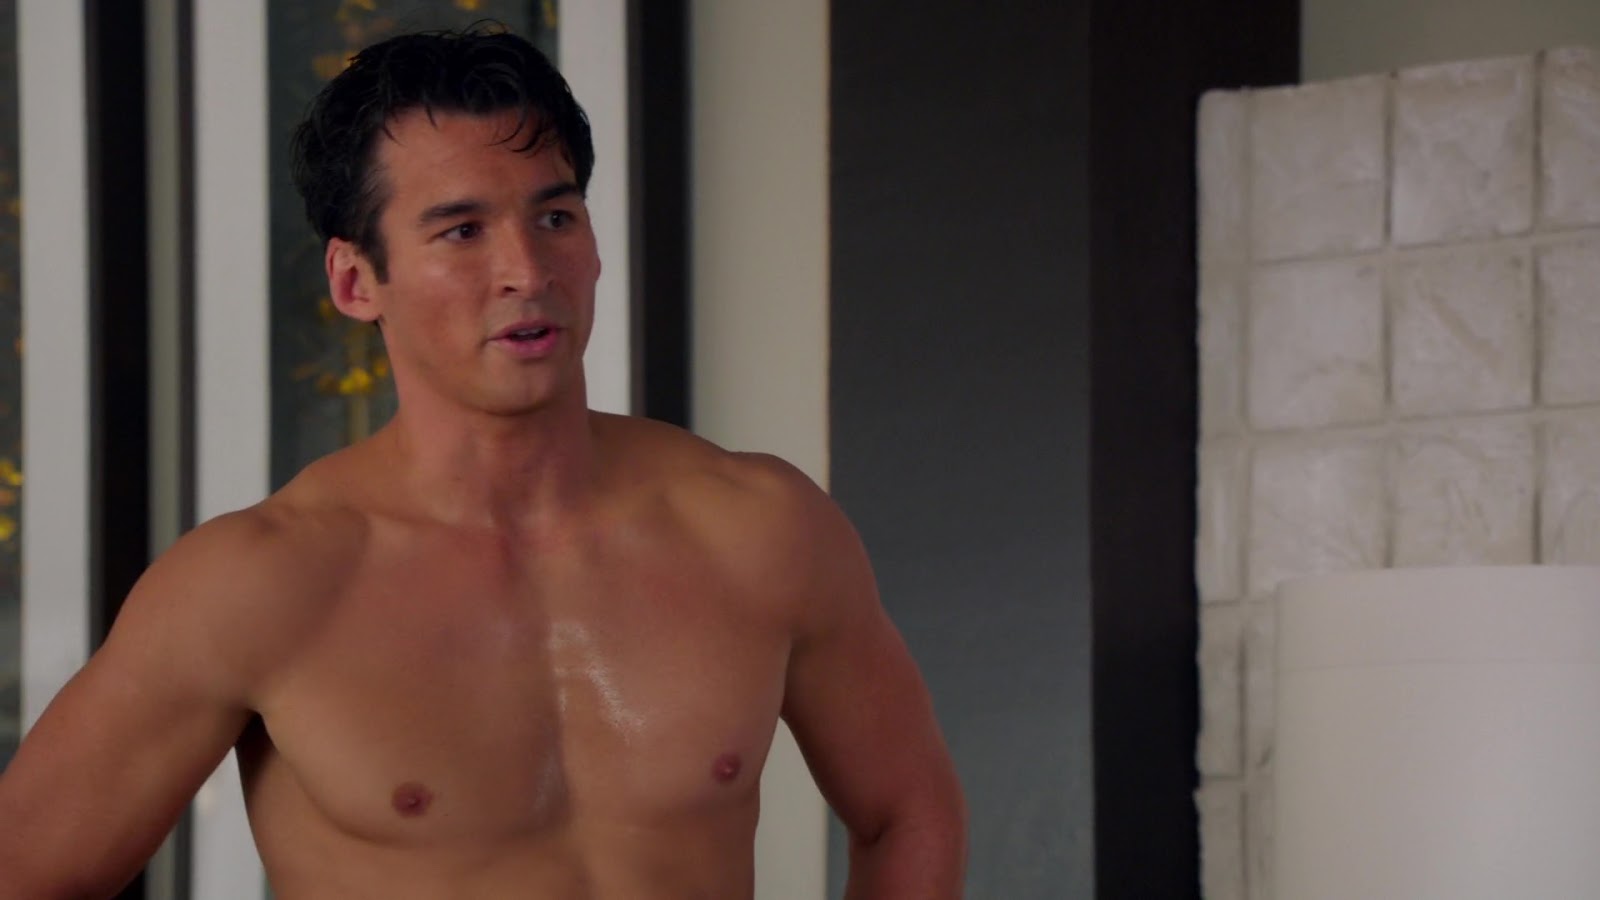 Jay Hayden shirtless in The Catch 2-04 "The Family Way" .